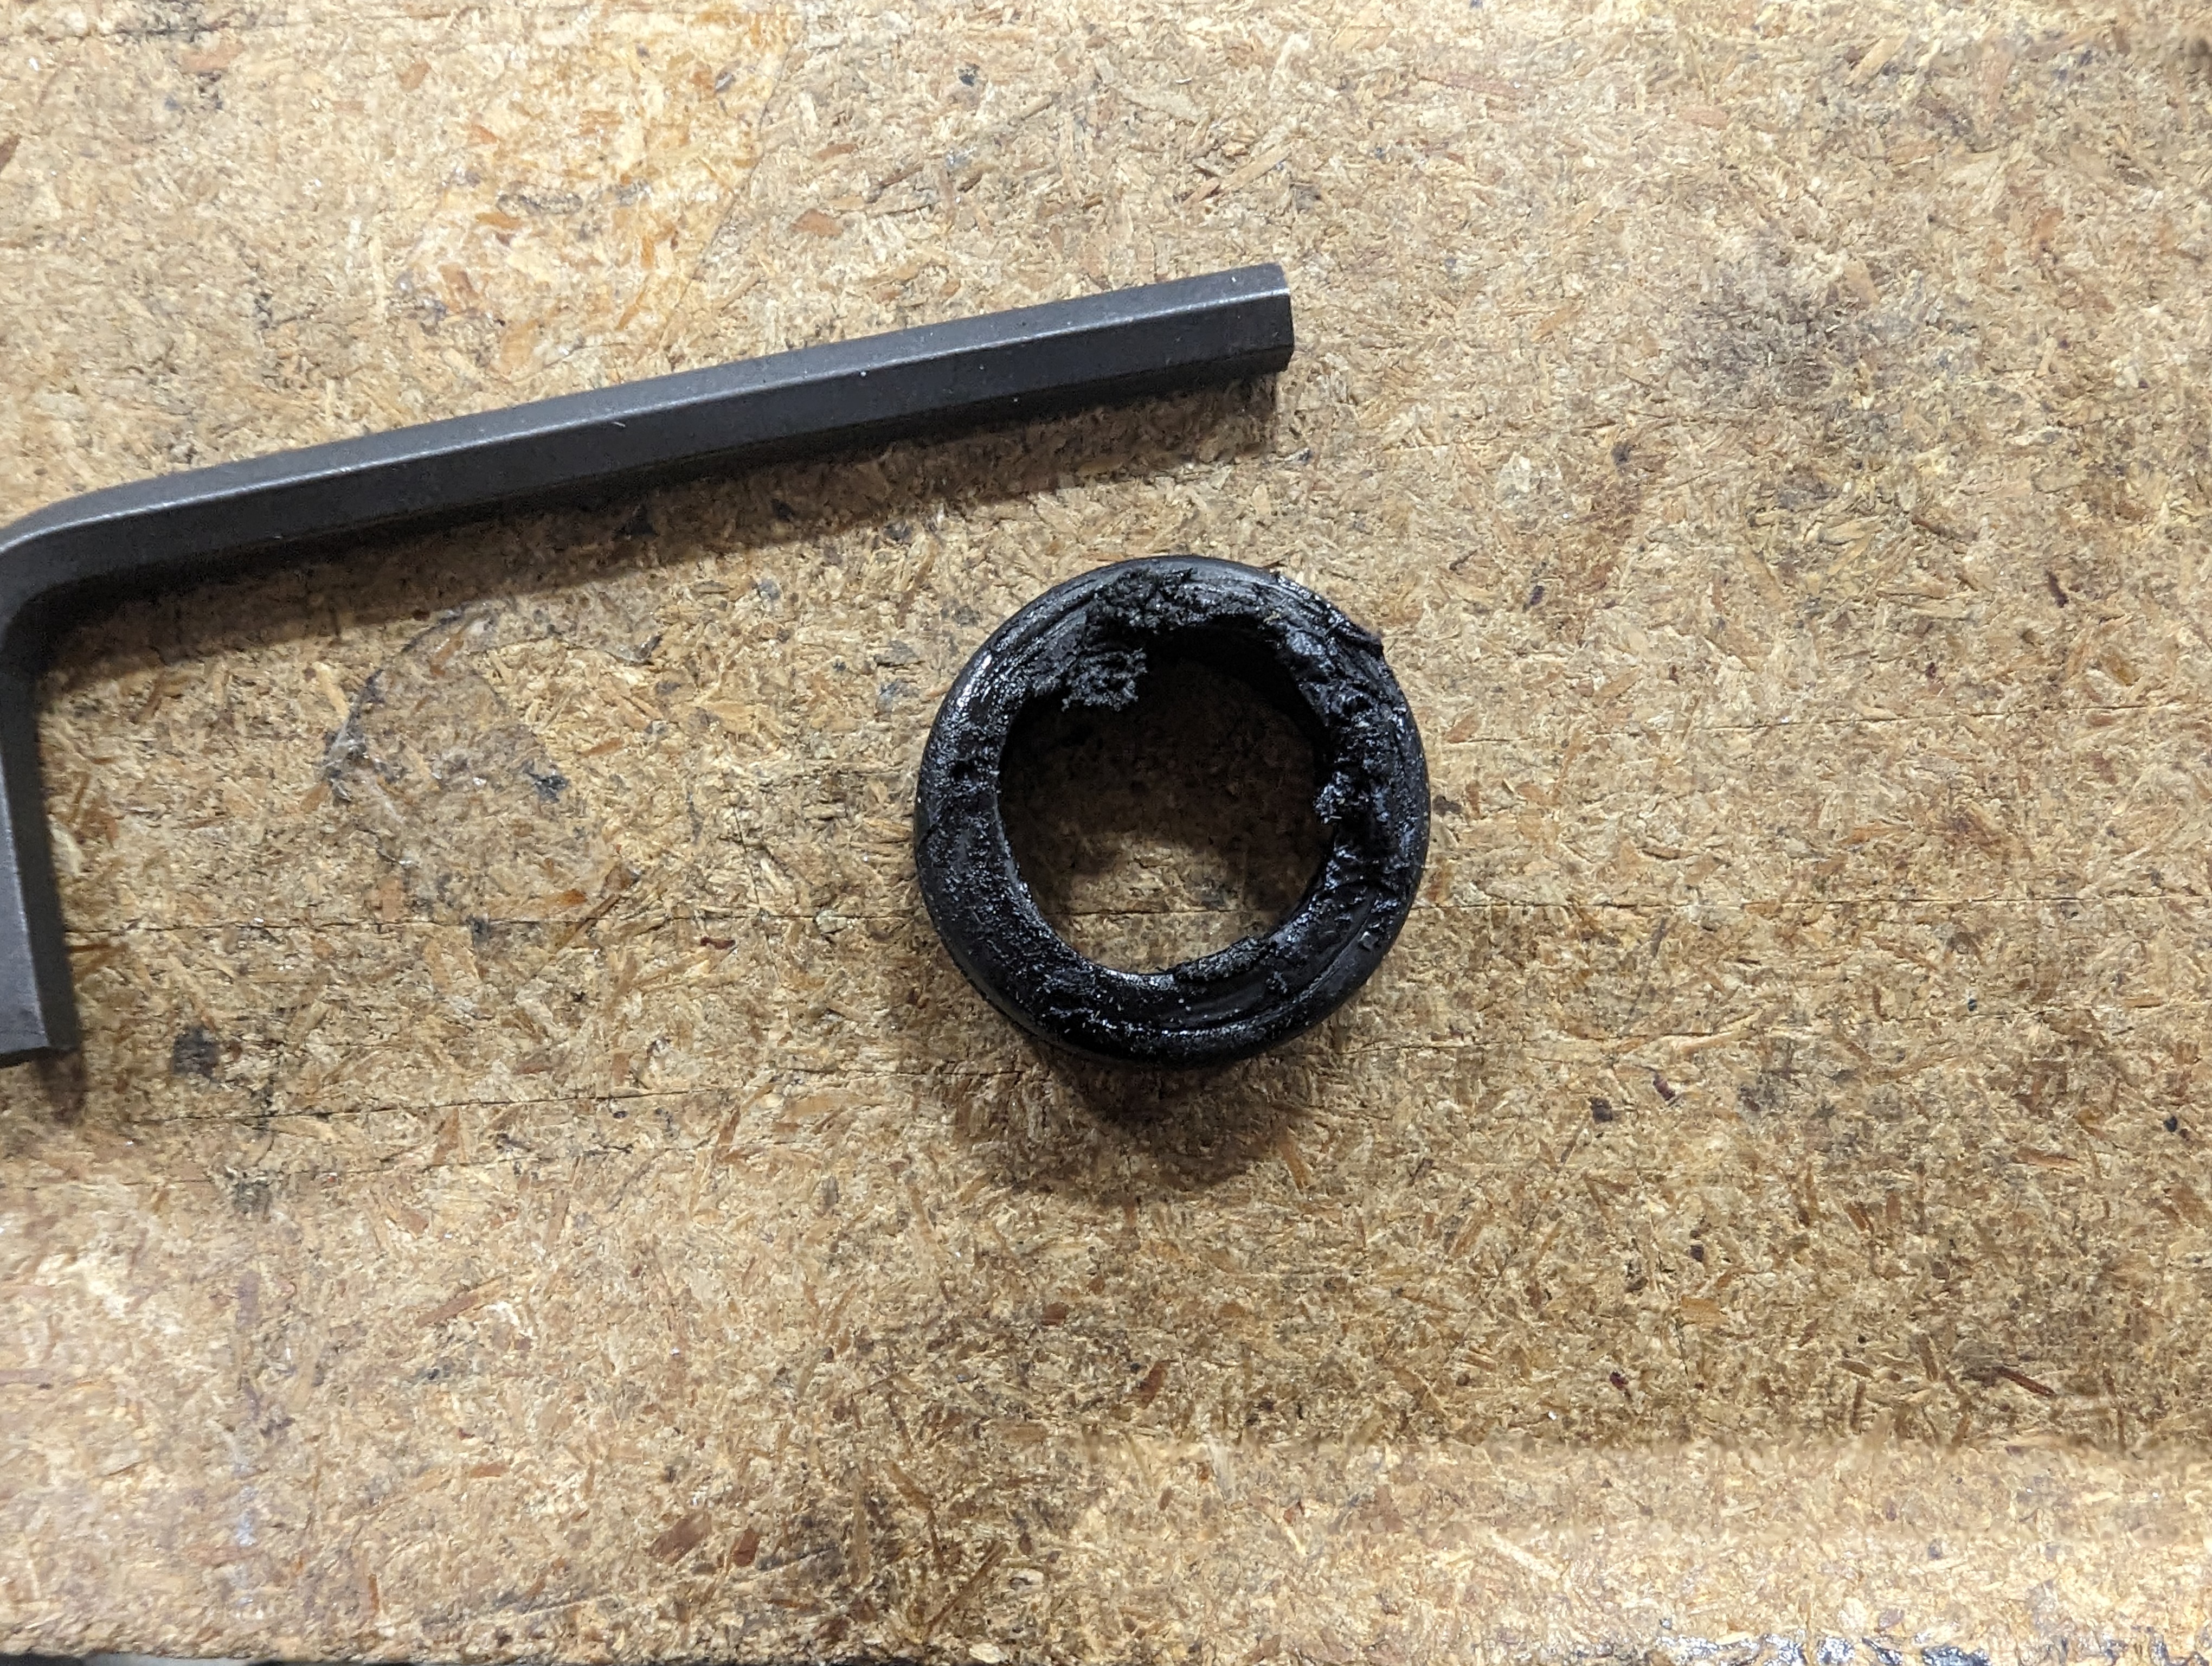 The damaged grommet on the bench